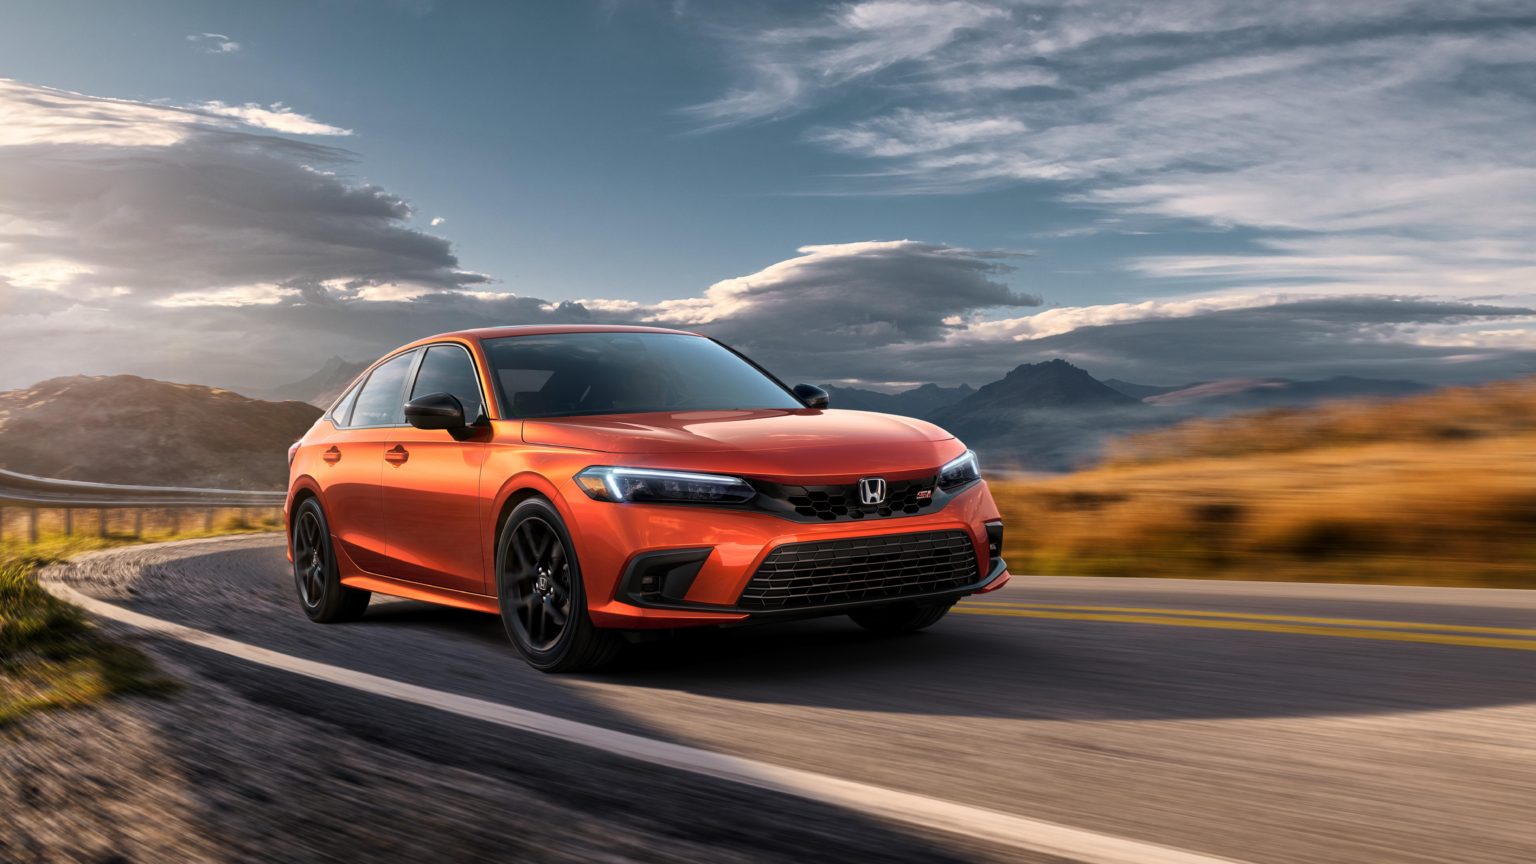 The new Si gets many improvements over the standard Civic.